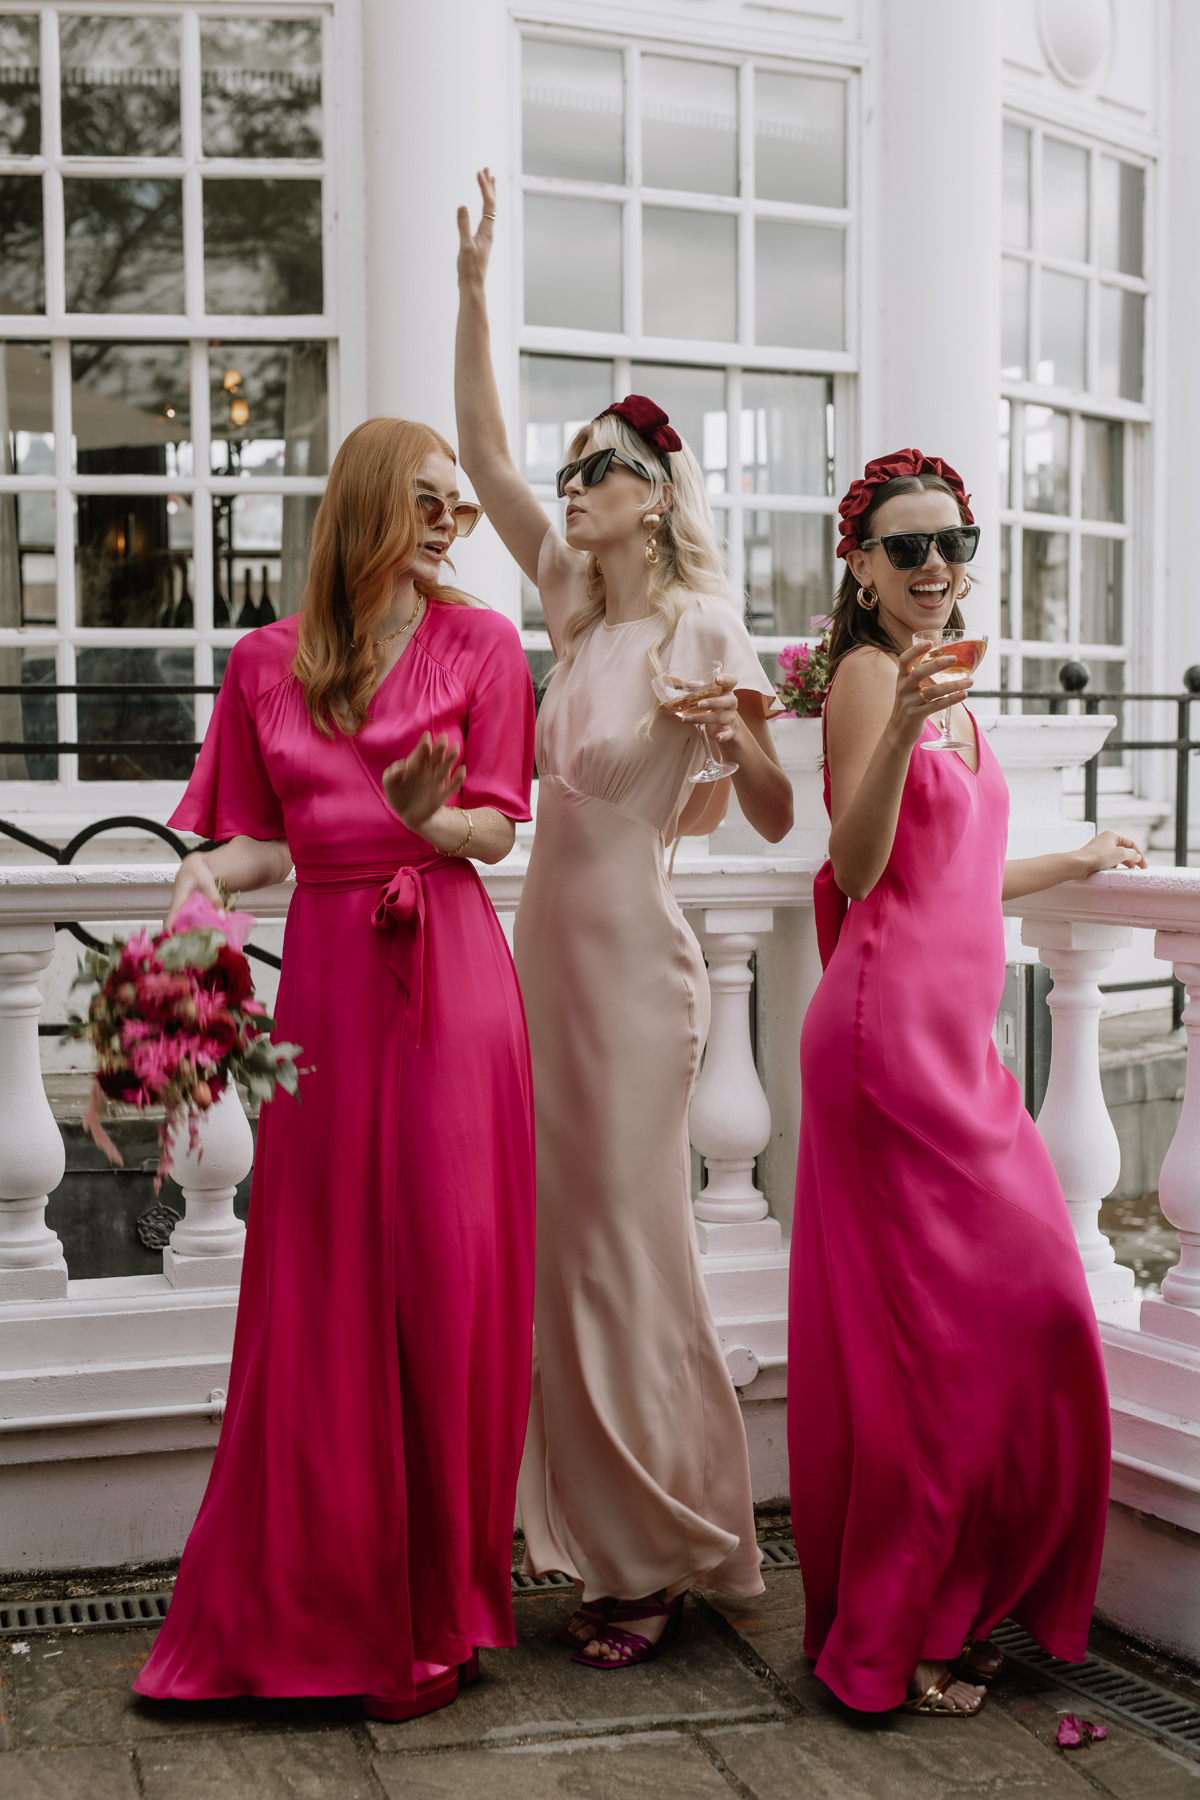 Bright pink modern bridesmaids dresses by Maids to Measure